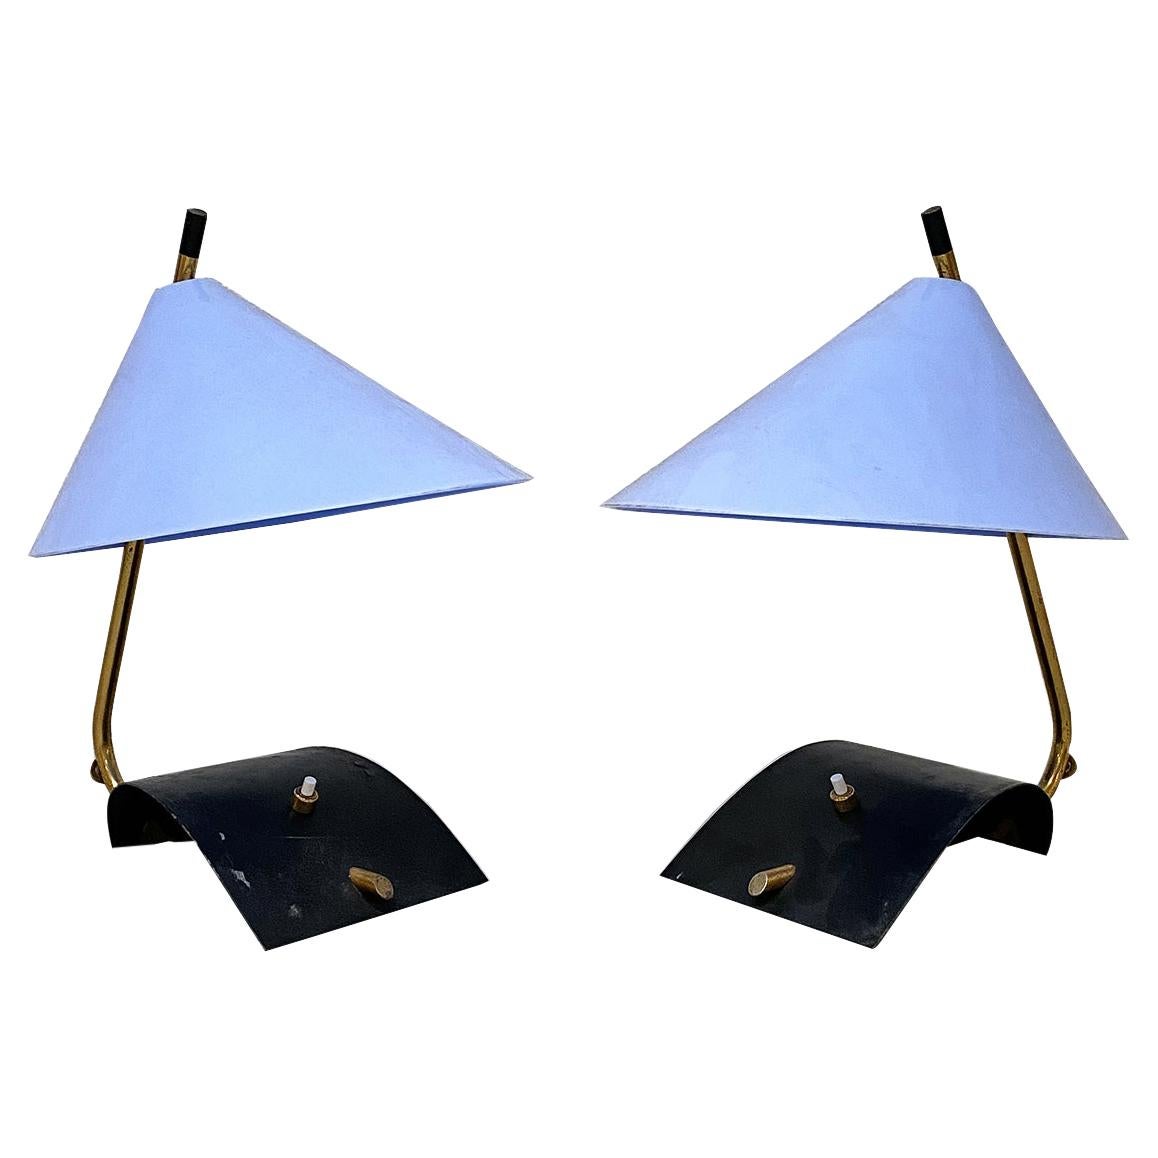 Italian Mid-Century Brass Table Lamps with Blue Lampshade by Stilnovo, 1950s